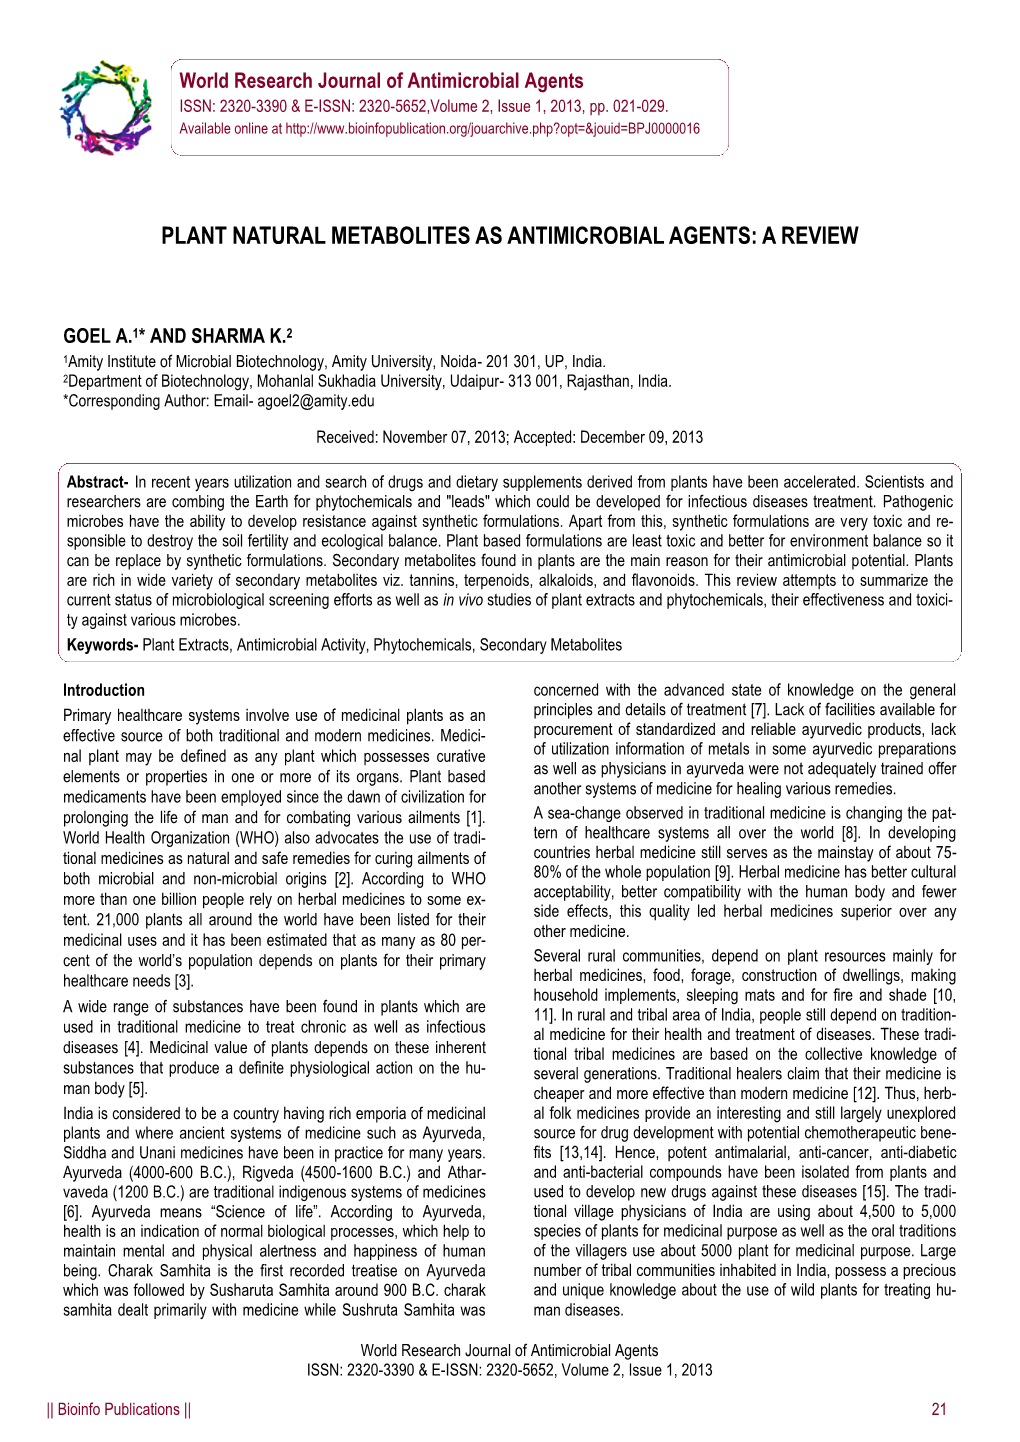 Plant Natural Metabolites As Antimicrobial Agents: a Review